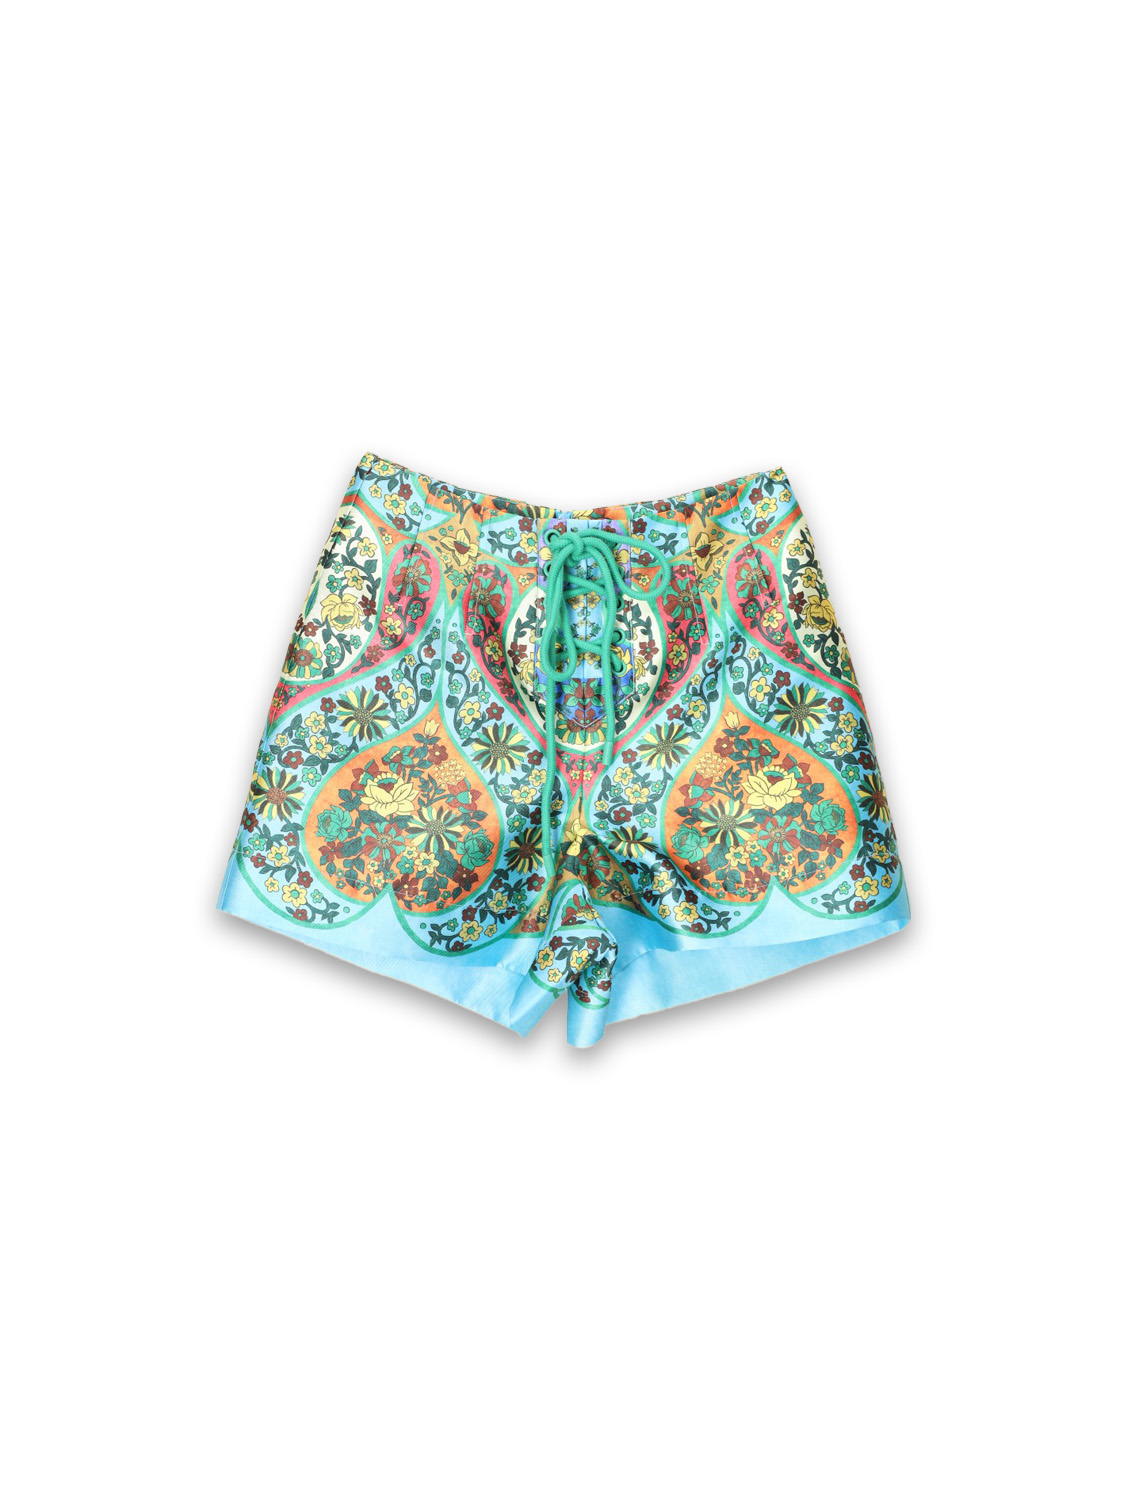 Sofie - shorts with floral print 